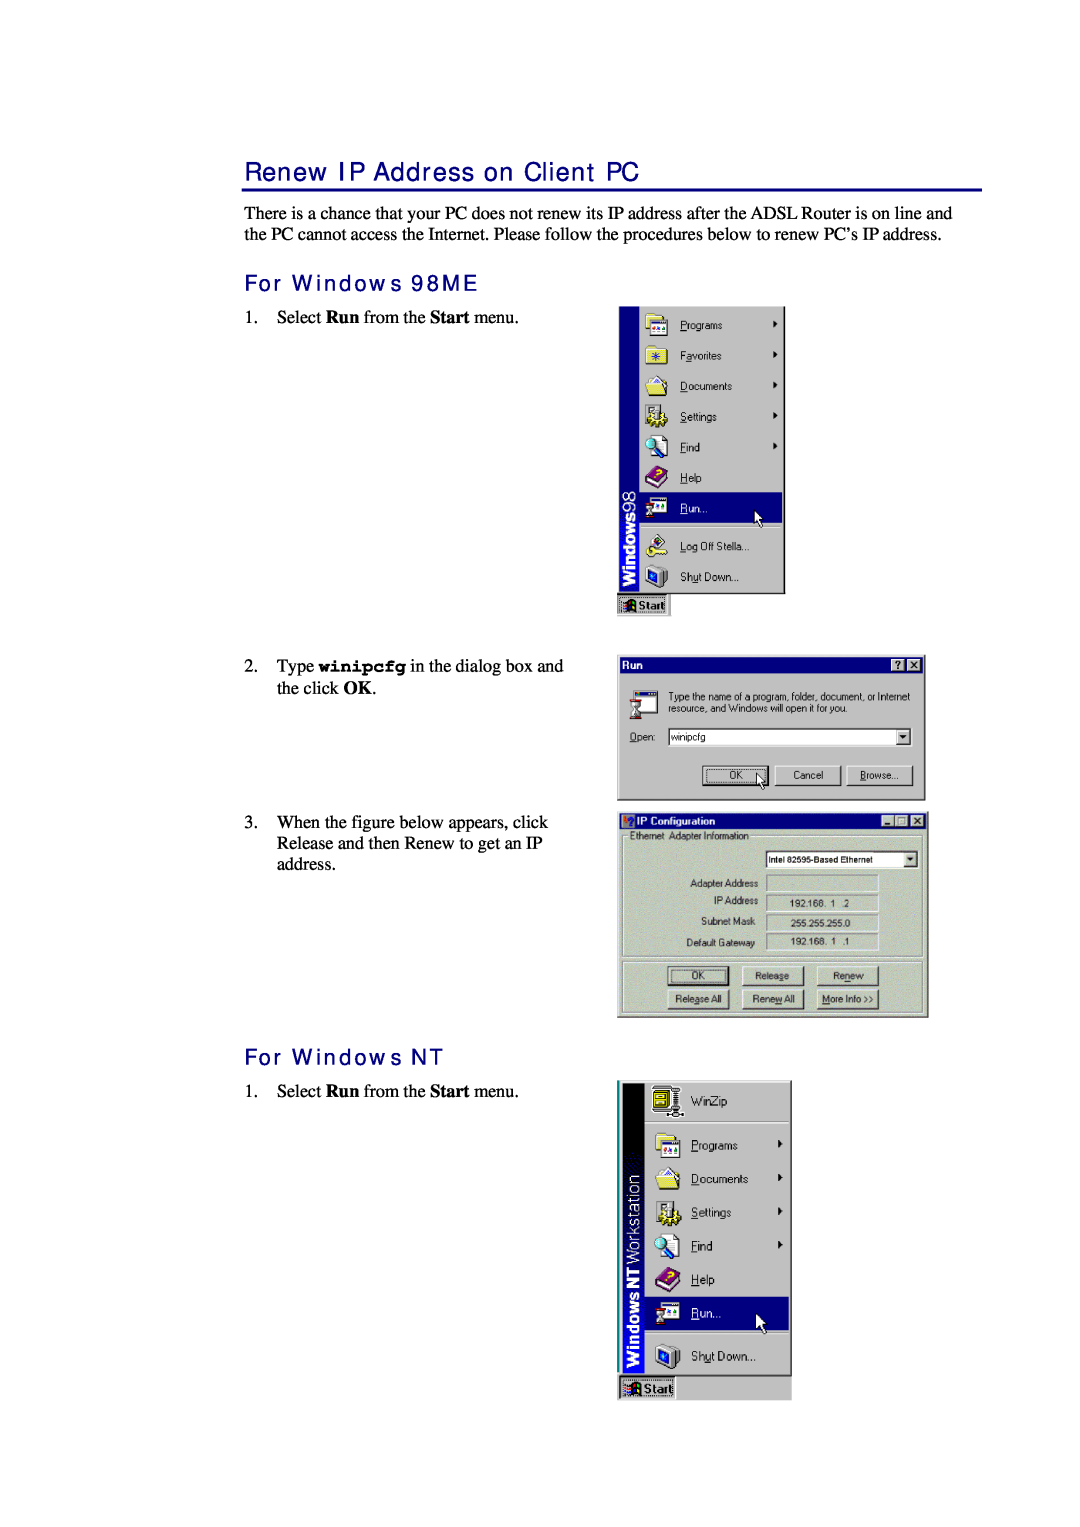 Siemens CL-010-I manual Renew IP Address on Client PC, For Windows 98ME, For Windows NT 